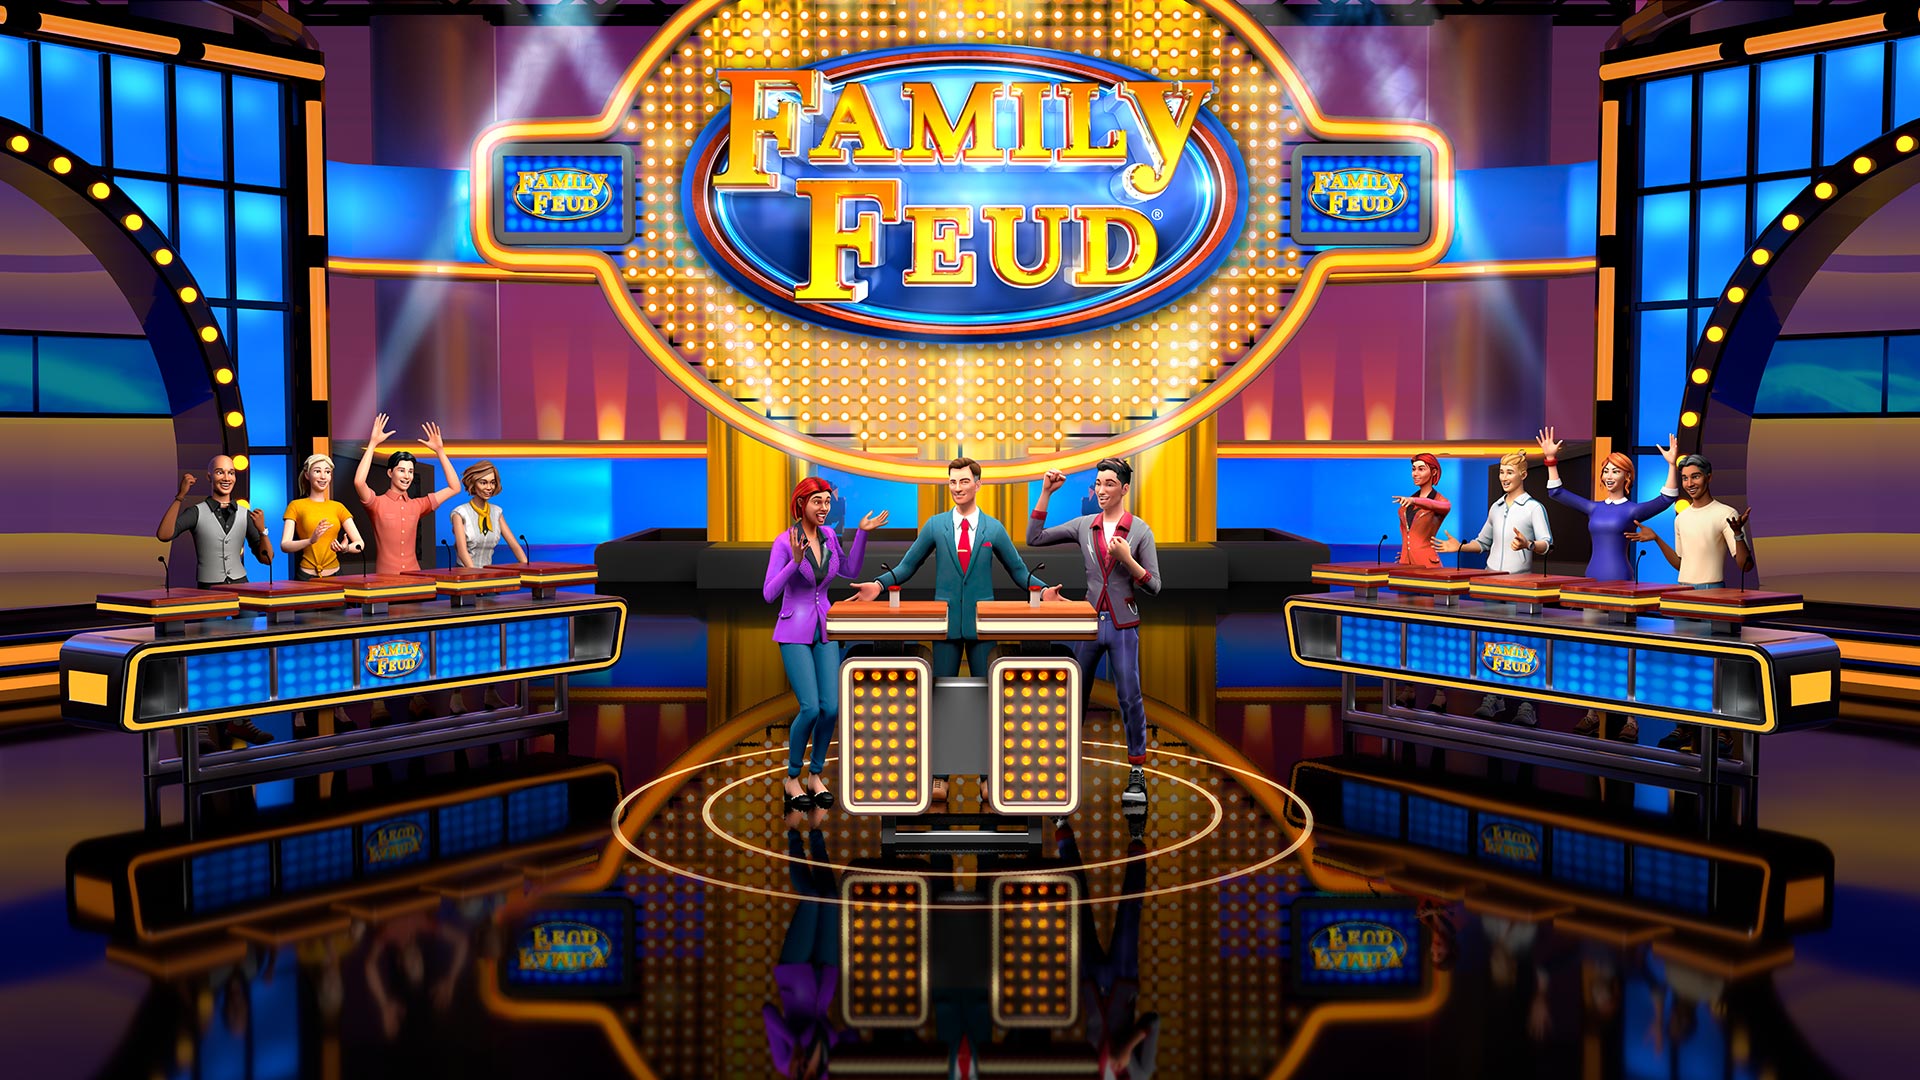 download family feud 2 full version free